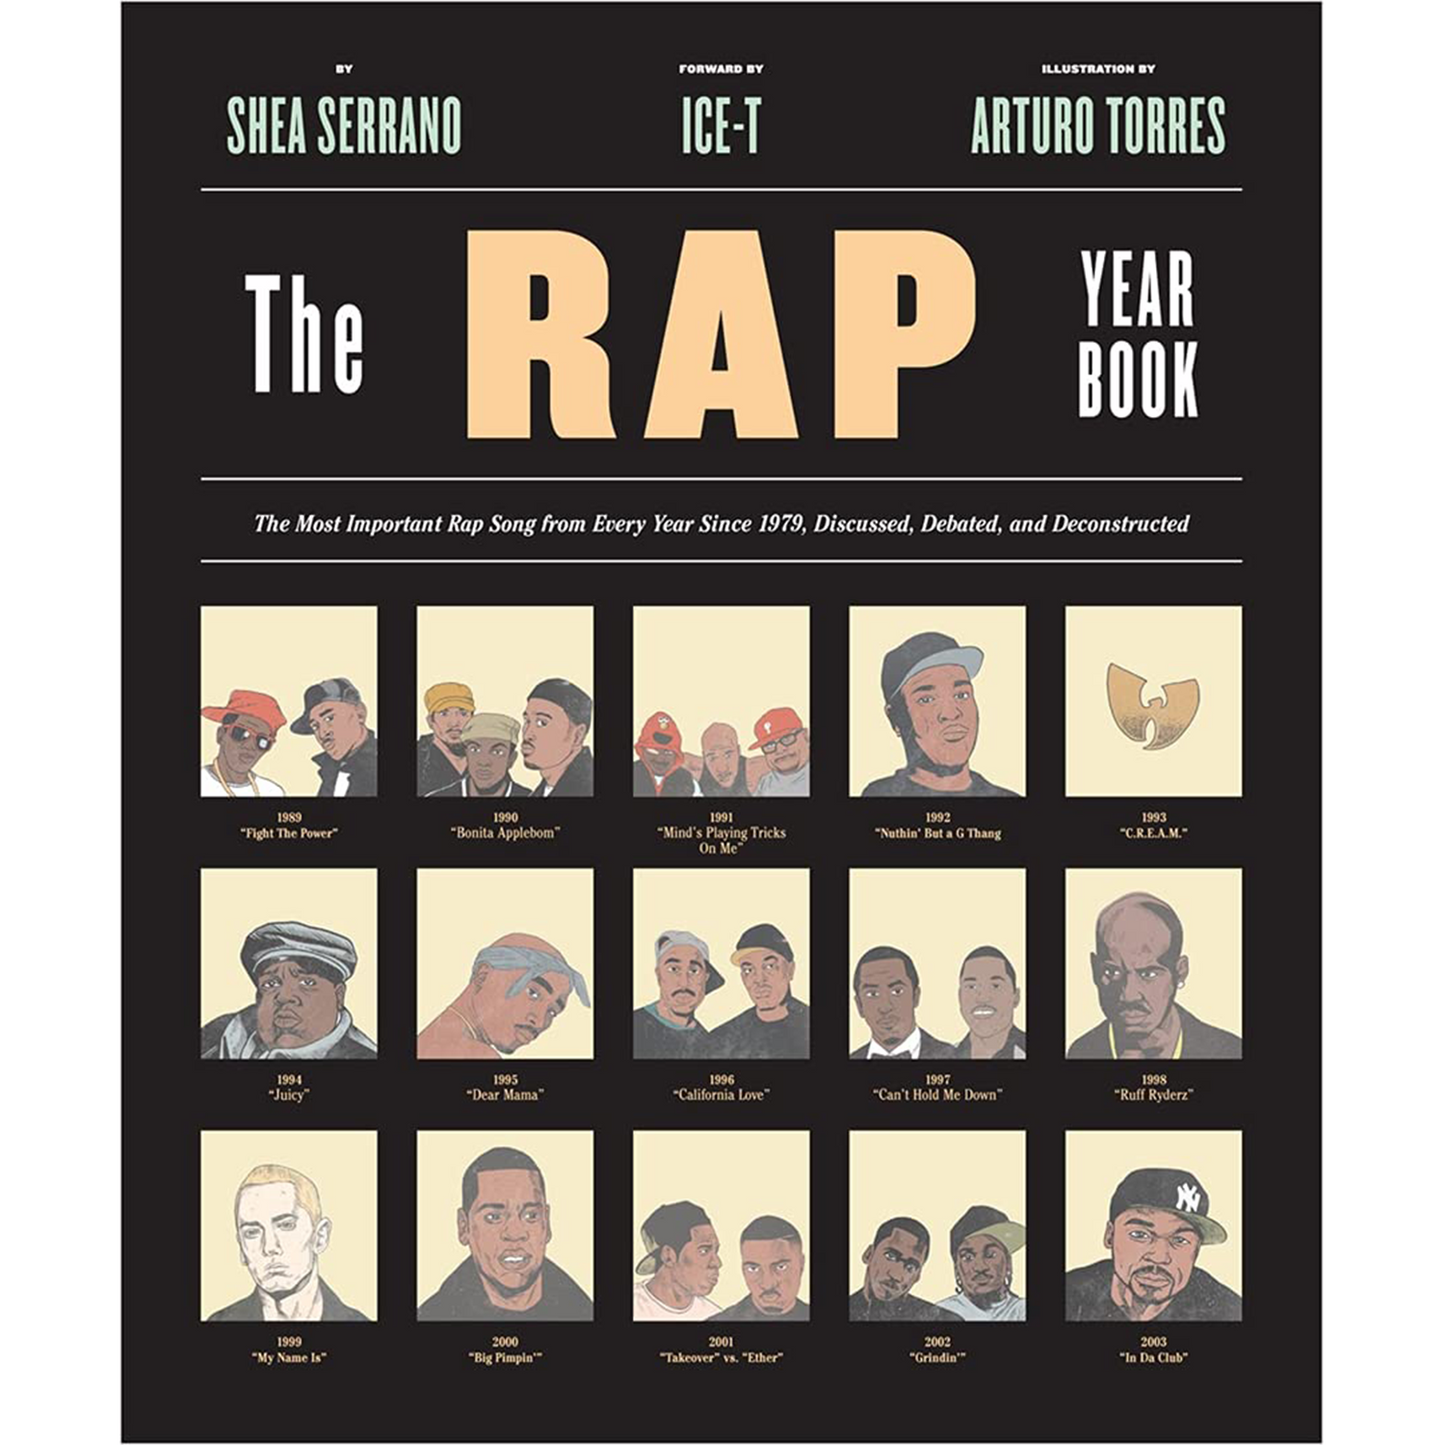 The Rap Year Book: The Most Important Rap Song From Every Year Since 1979, Discussed, Debated, and Deconstructed (Paperback)